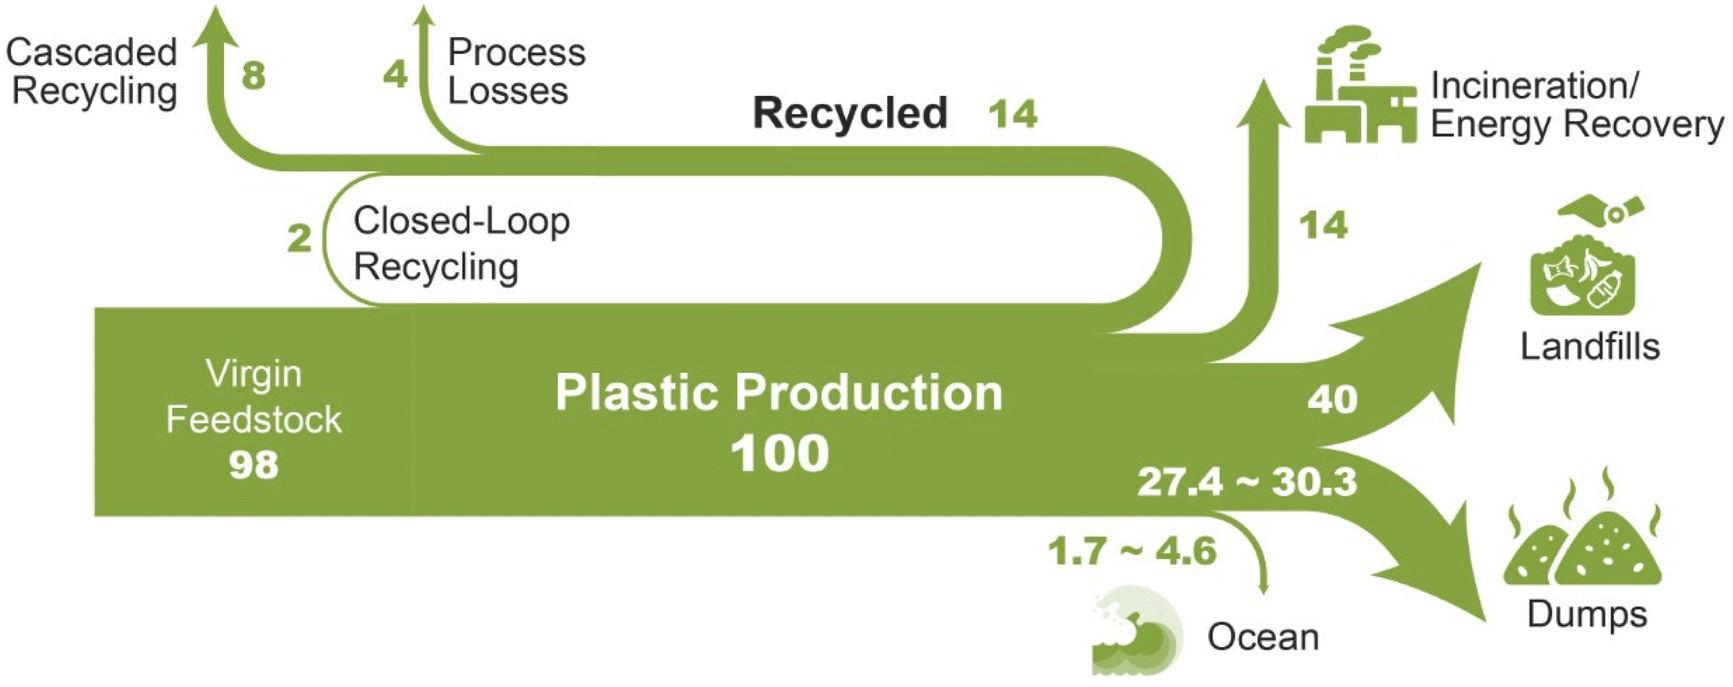 Expanding plastics recycling technologies: chemical aspects, technology  status and challenges - Green Chemistry (RSC Publishing)  DOI:10.1039/D2GC02588D